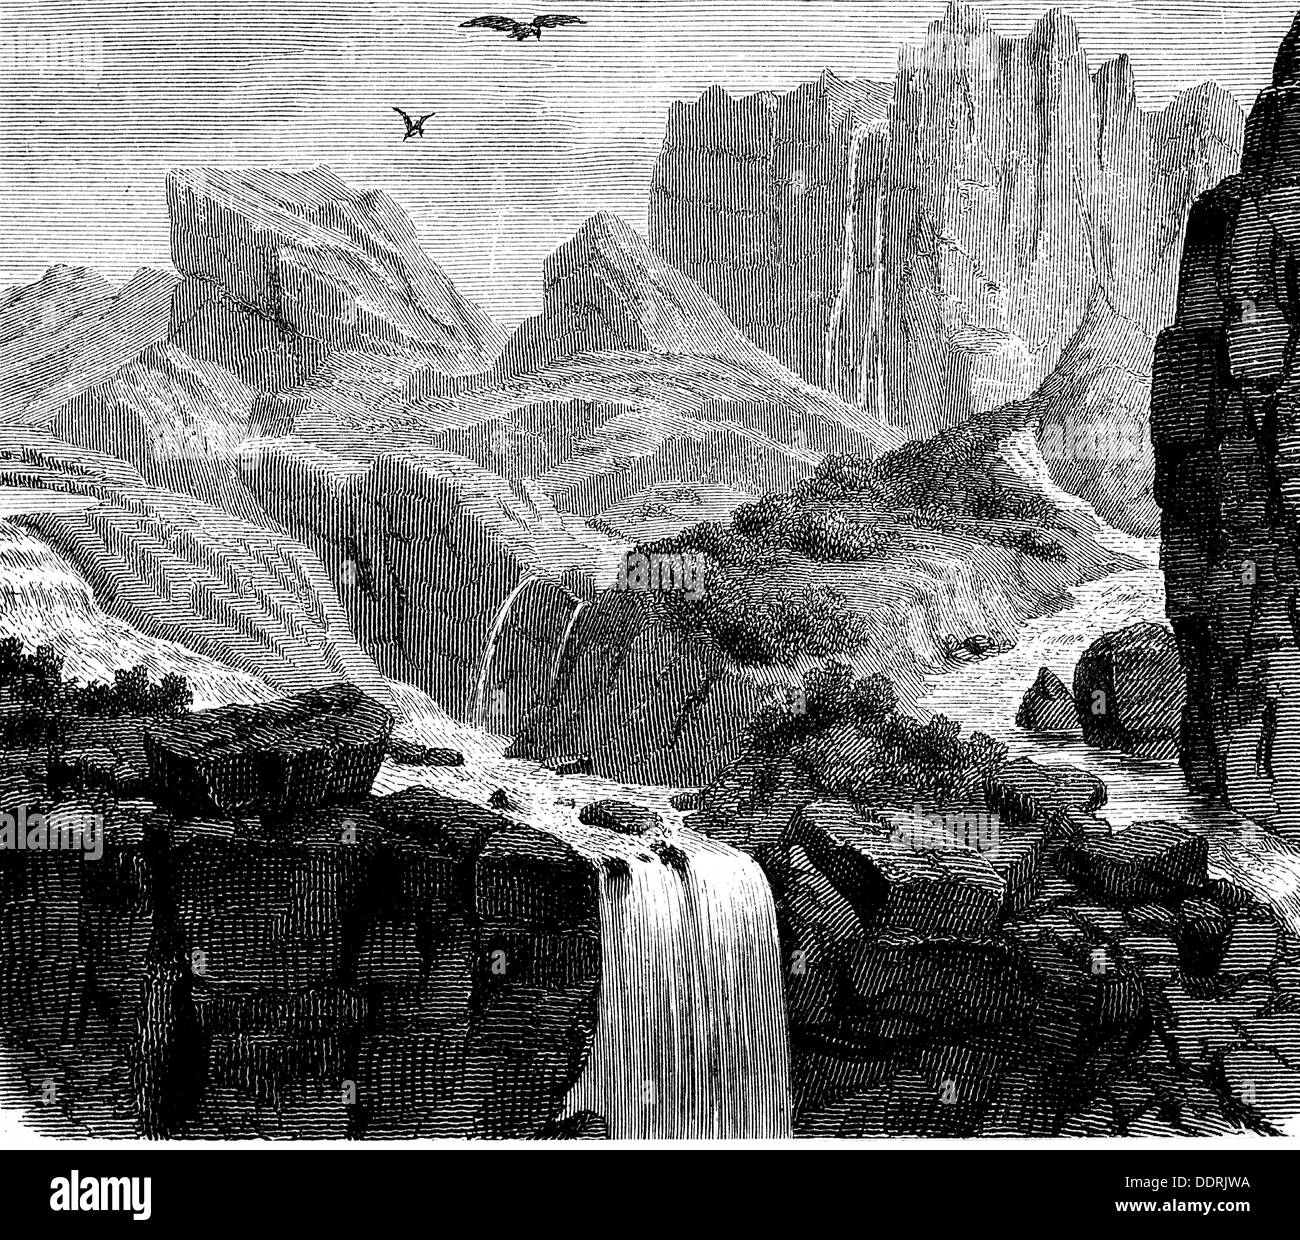 religion, ancient world, Greek mythology, river Styx, wood engraving, 19th century, 19th century, graphic, graphics, landscape, landscapes, mounts, mount, mountains, mountain, stretch of waters, river, rivers, waterfall, waterfalls, falls, border, borders, boundary, transitions, underworld, underworlds, hereafter, beyond, afterworld, Hades, religion, religions, ancient world, ancient times, Greek, Grecian, historic, historical, ancient world, Additional-Rights-Clearences-Not Available Stock Photo